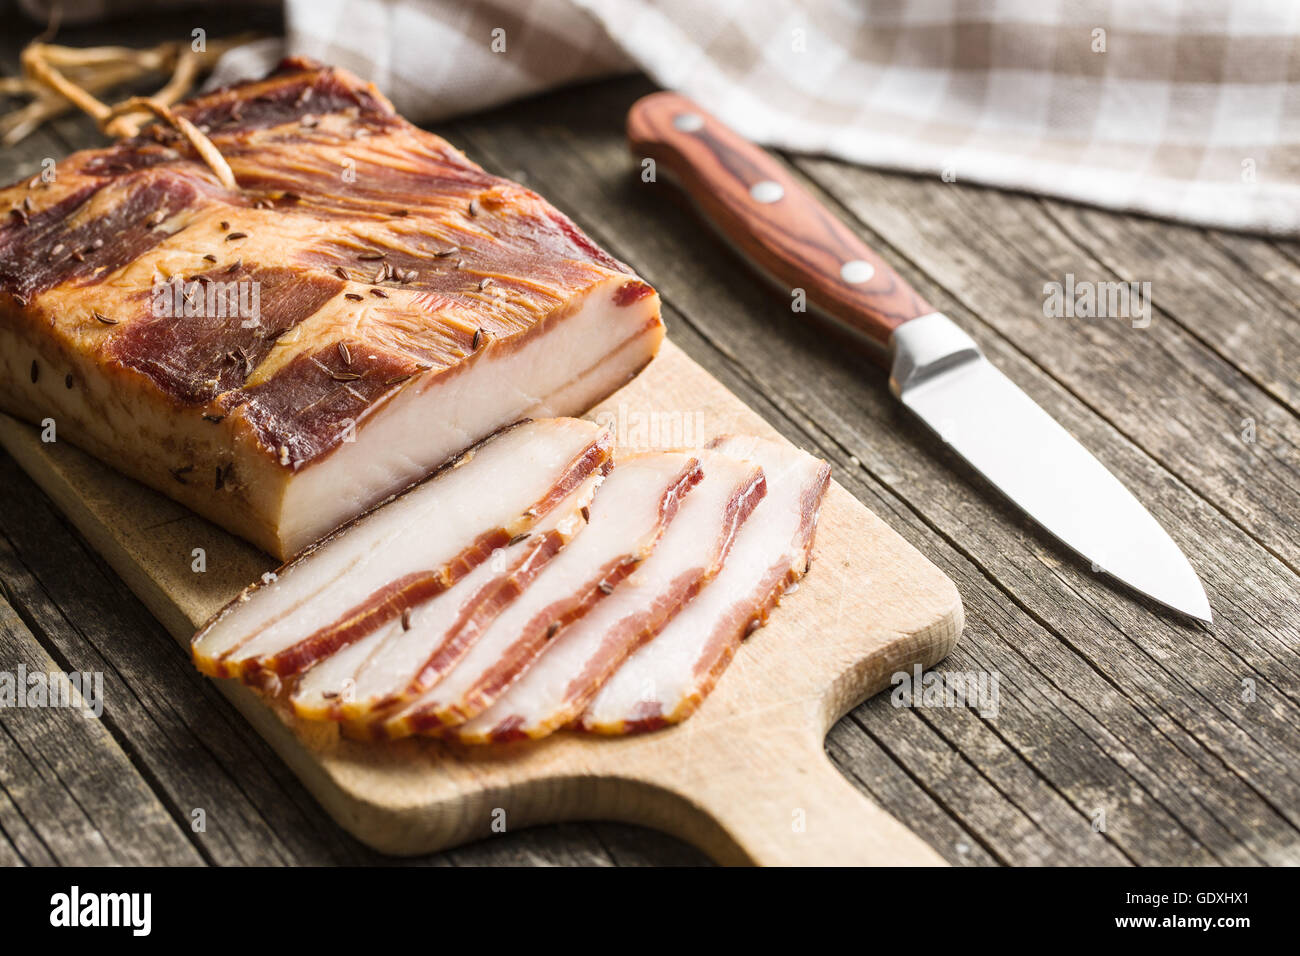 Sliced smoked bacon on old wooden table. Stock Photo